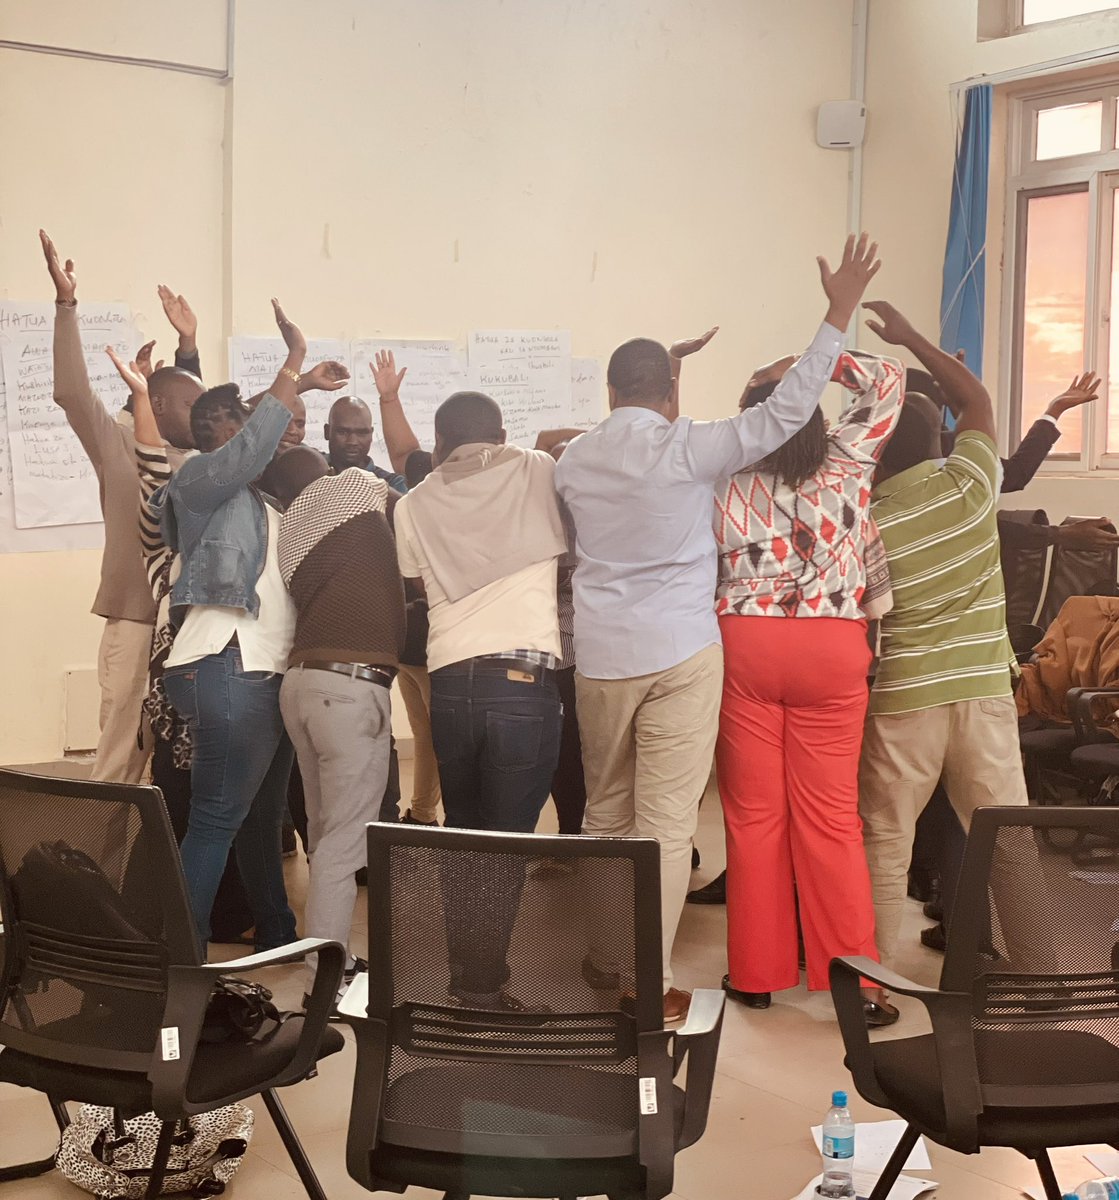 Mission accomplished! #FurahaTeens coaches now trained as trainers! Next week they will train 26 new facilitators & be assessed in the process! Hope we do end up with 10 certified national trainers to support the govt. to scale up the prog. in 🇹🇿. All the best! #positiveparenting